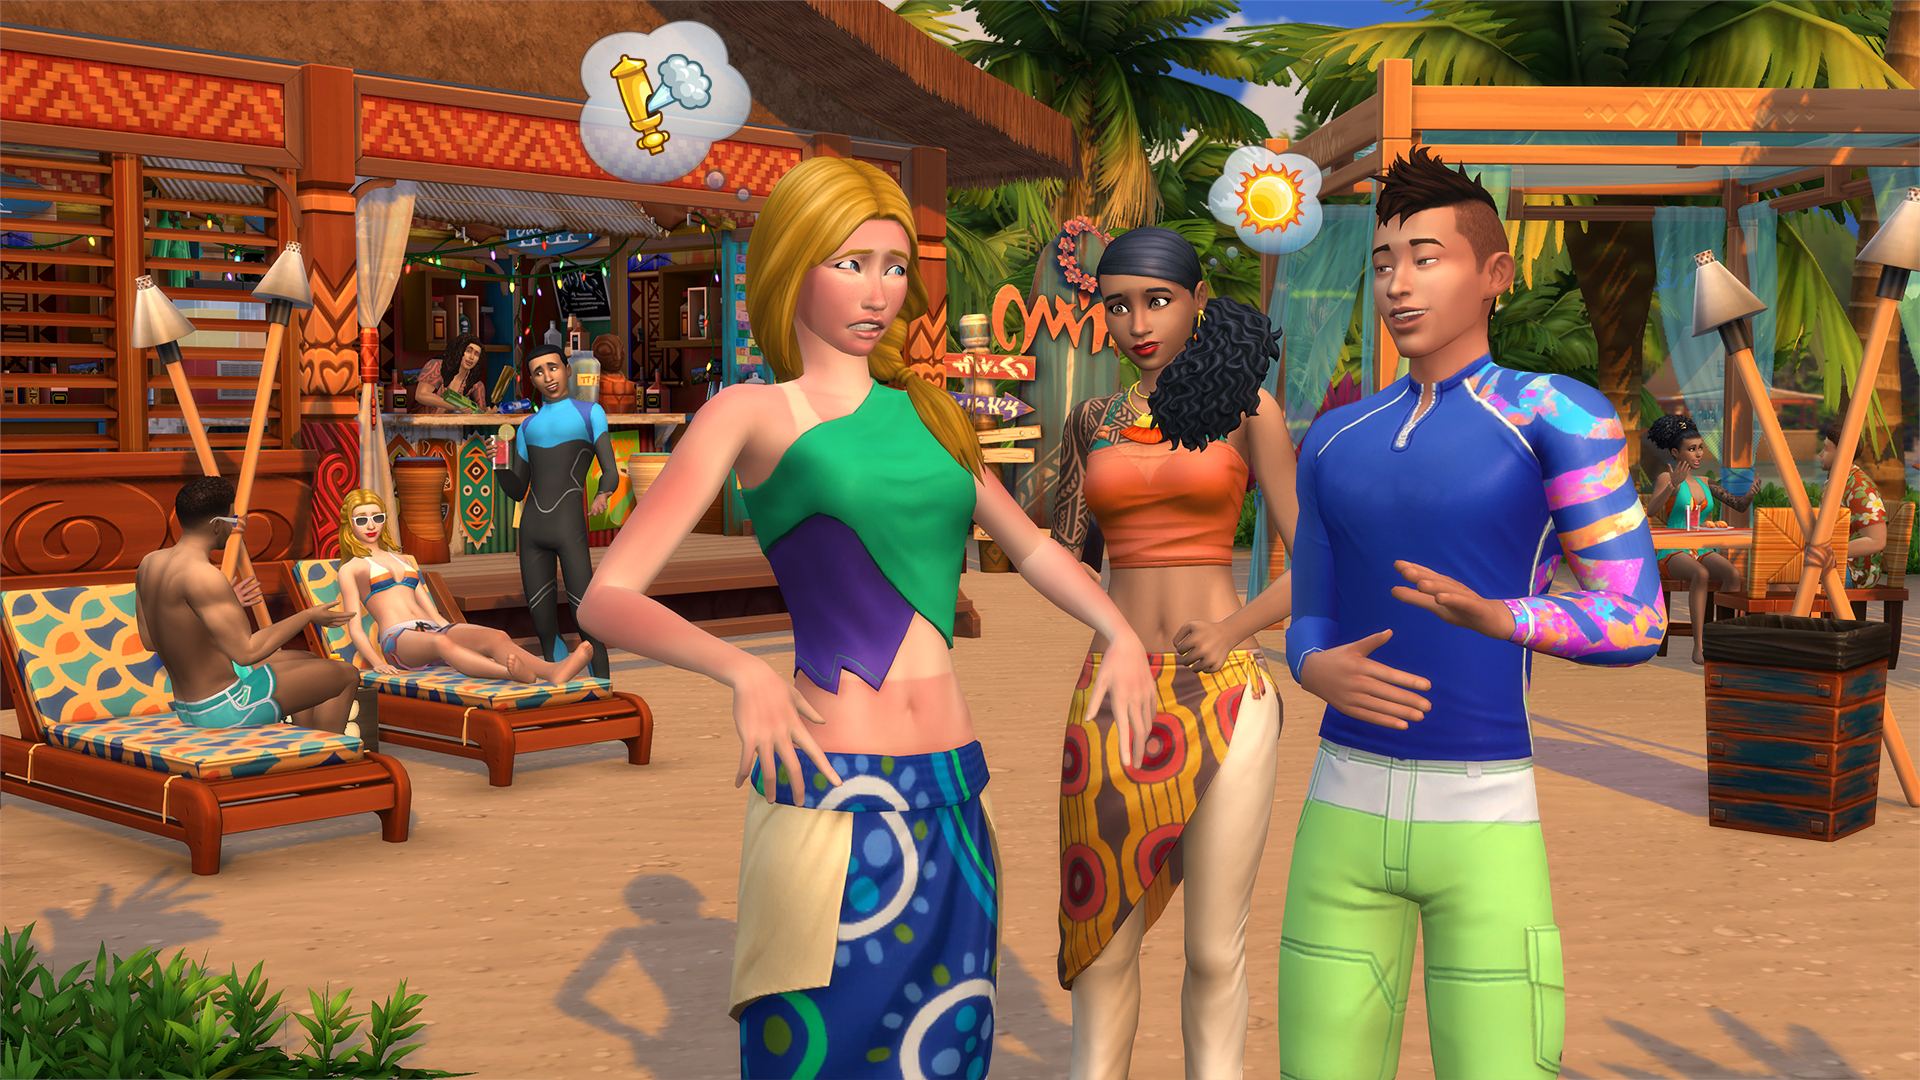 The Sims 5: everything you need to know